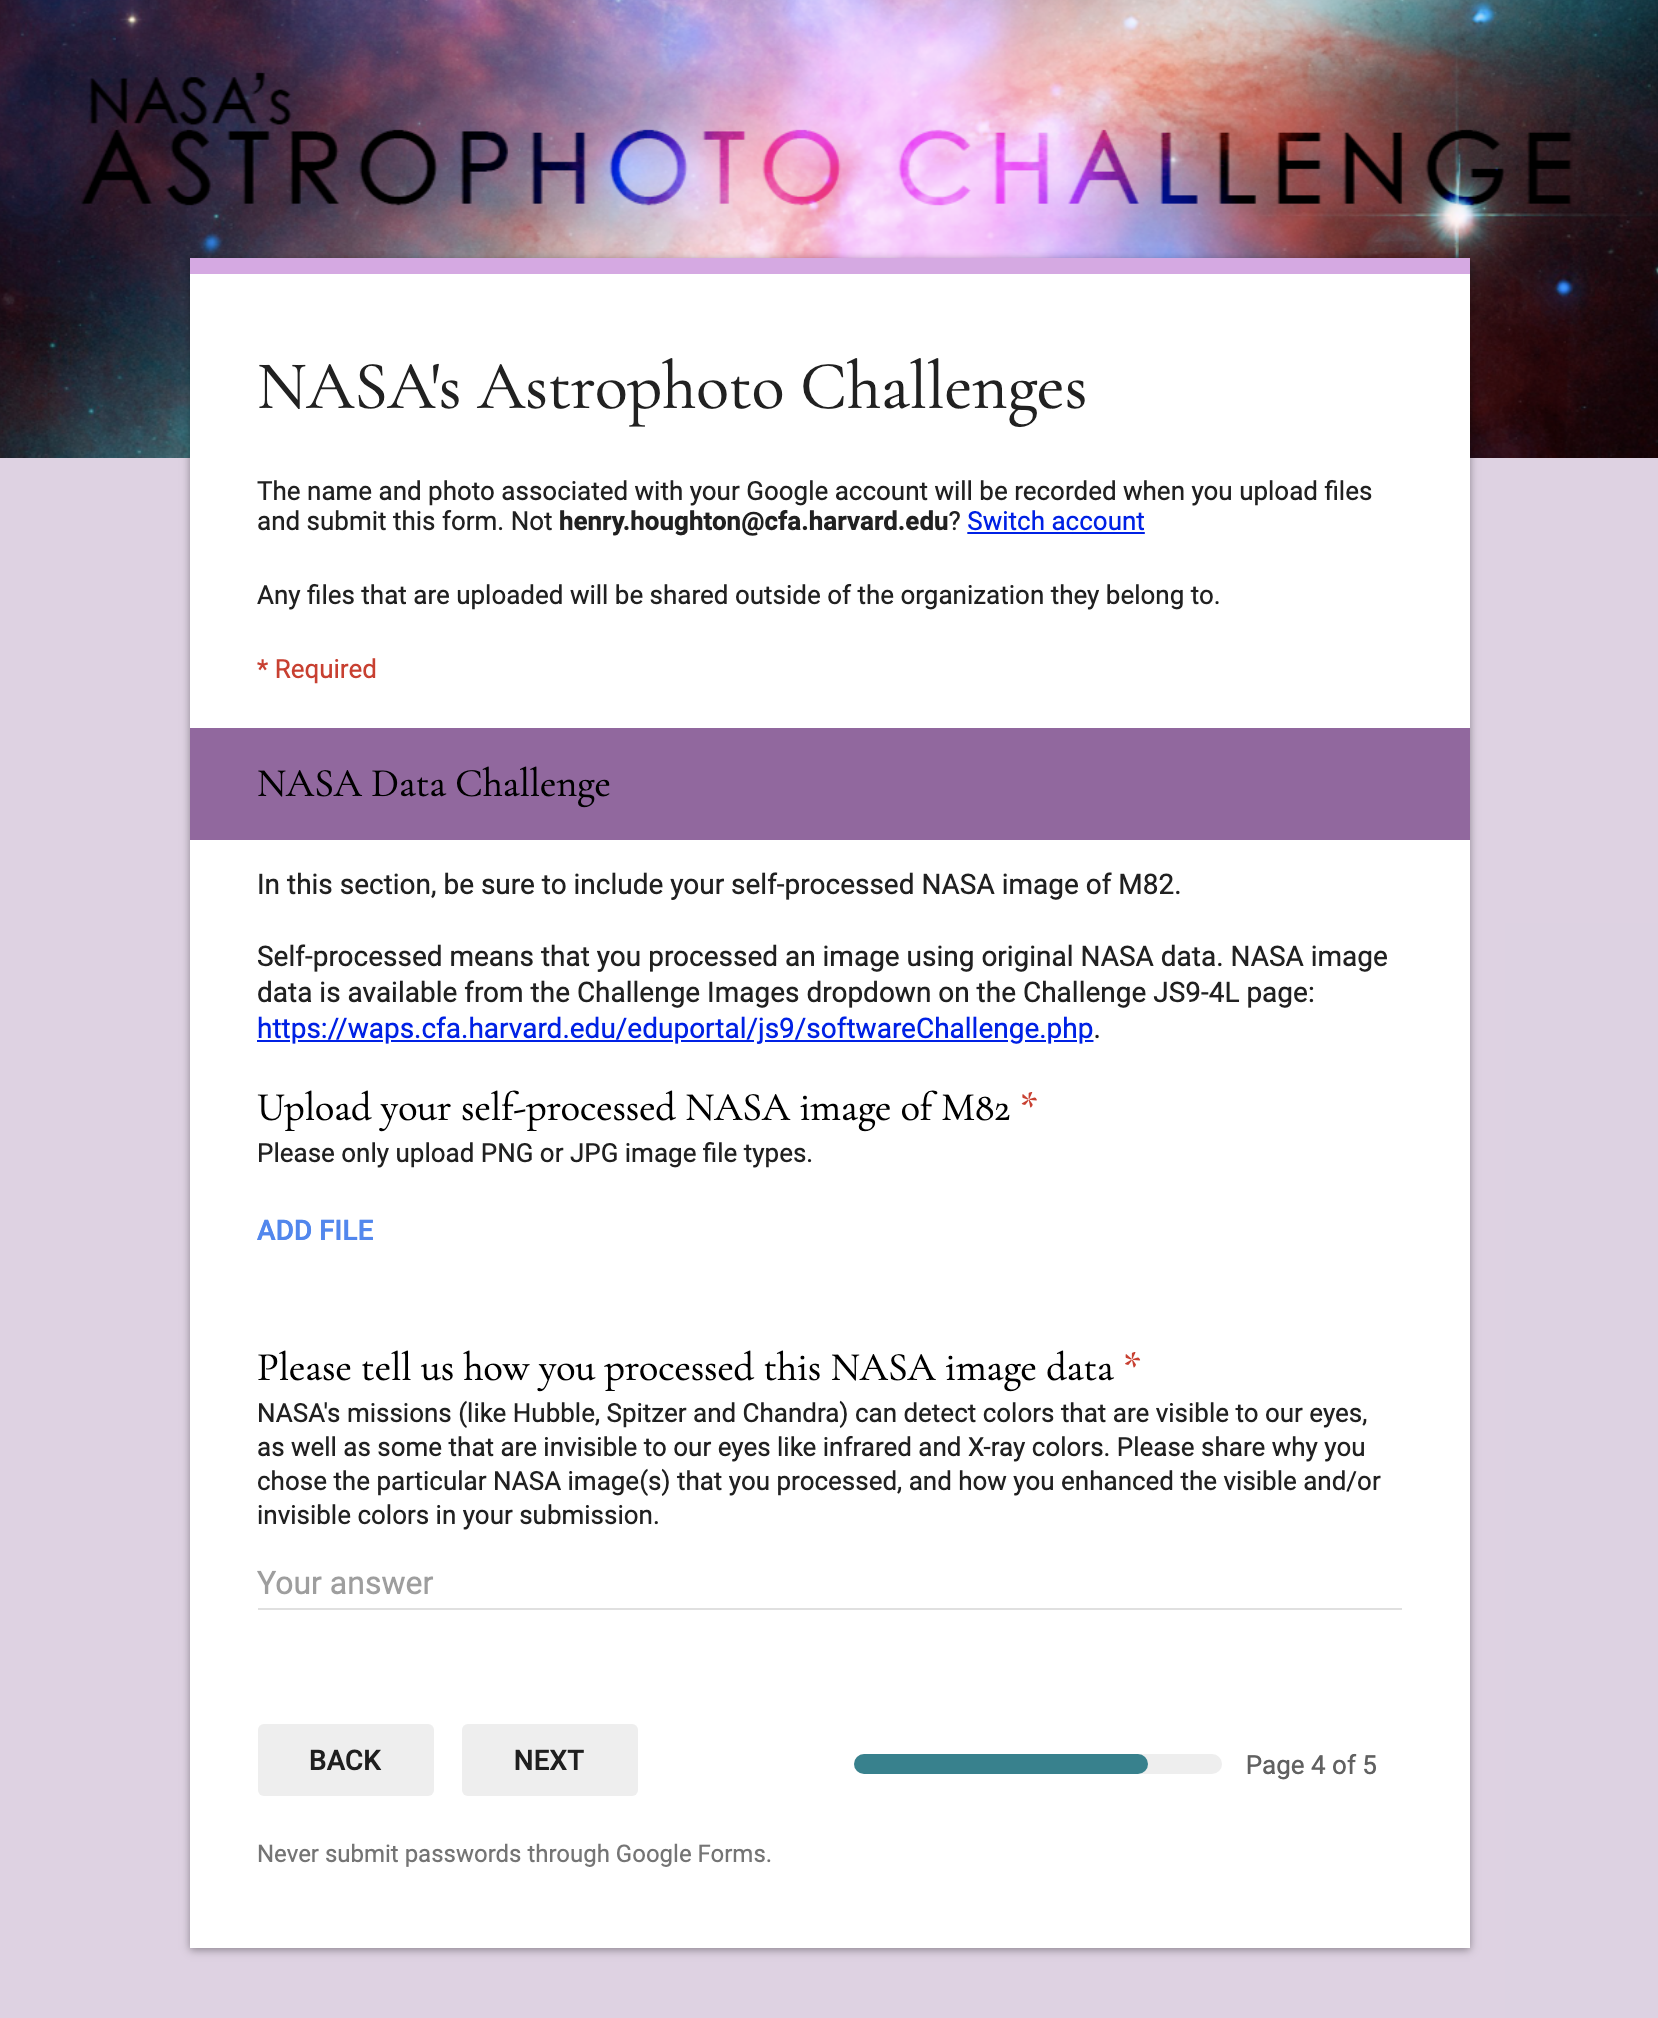 Submit your images to the NASA Astrophoto Challenge with this form